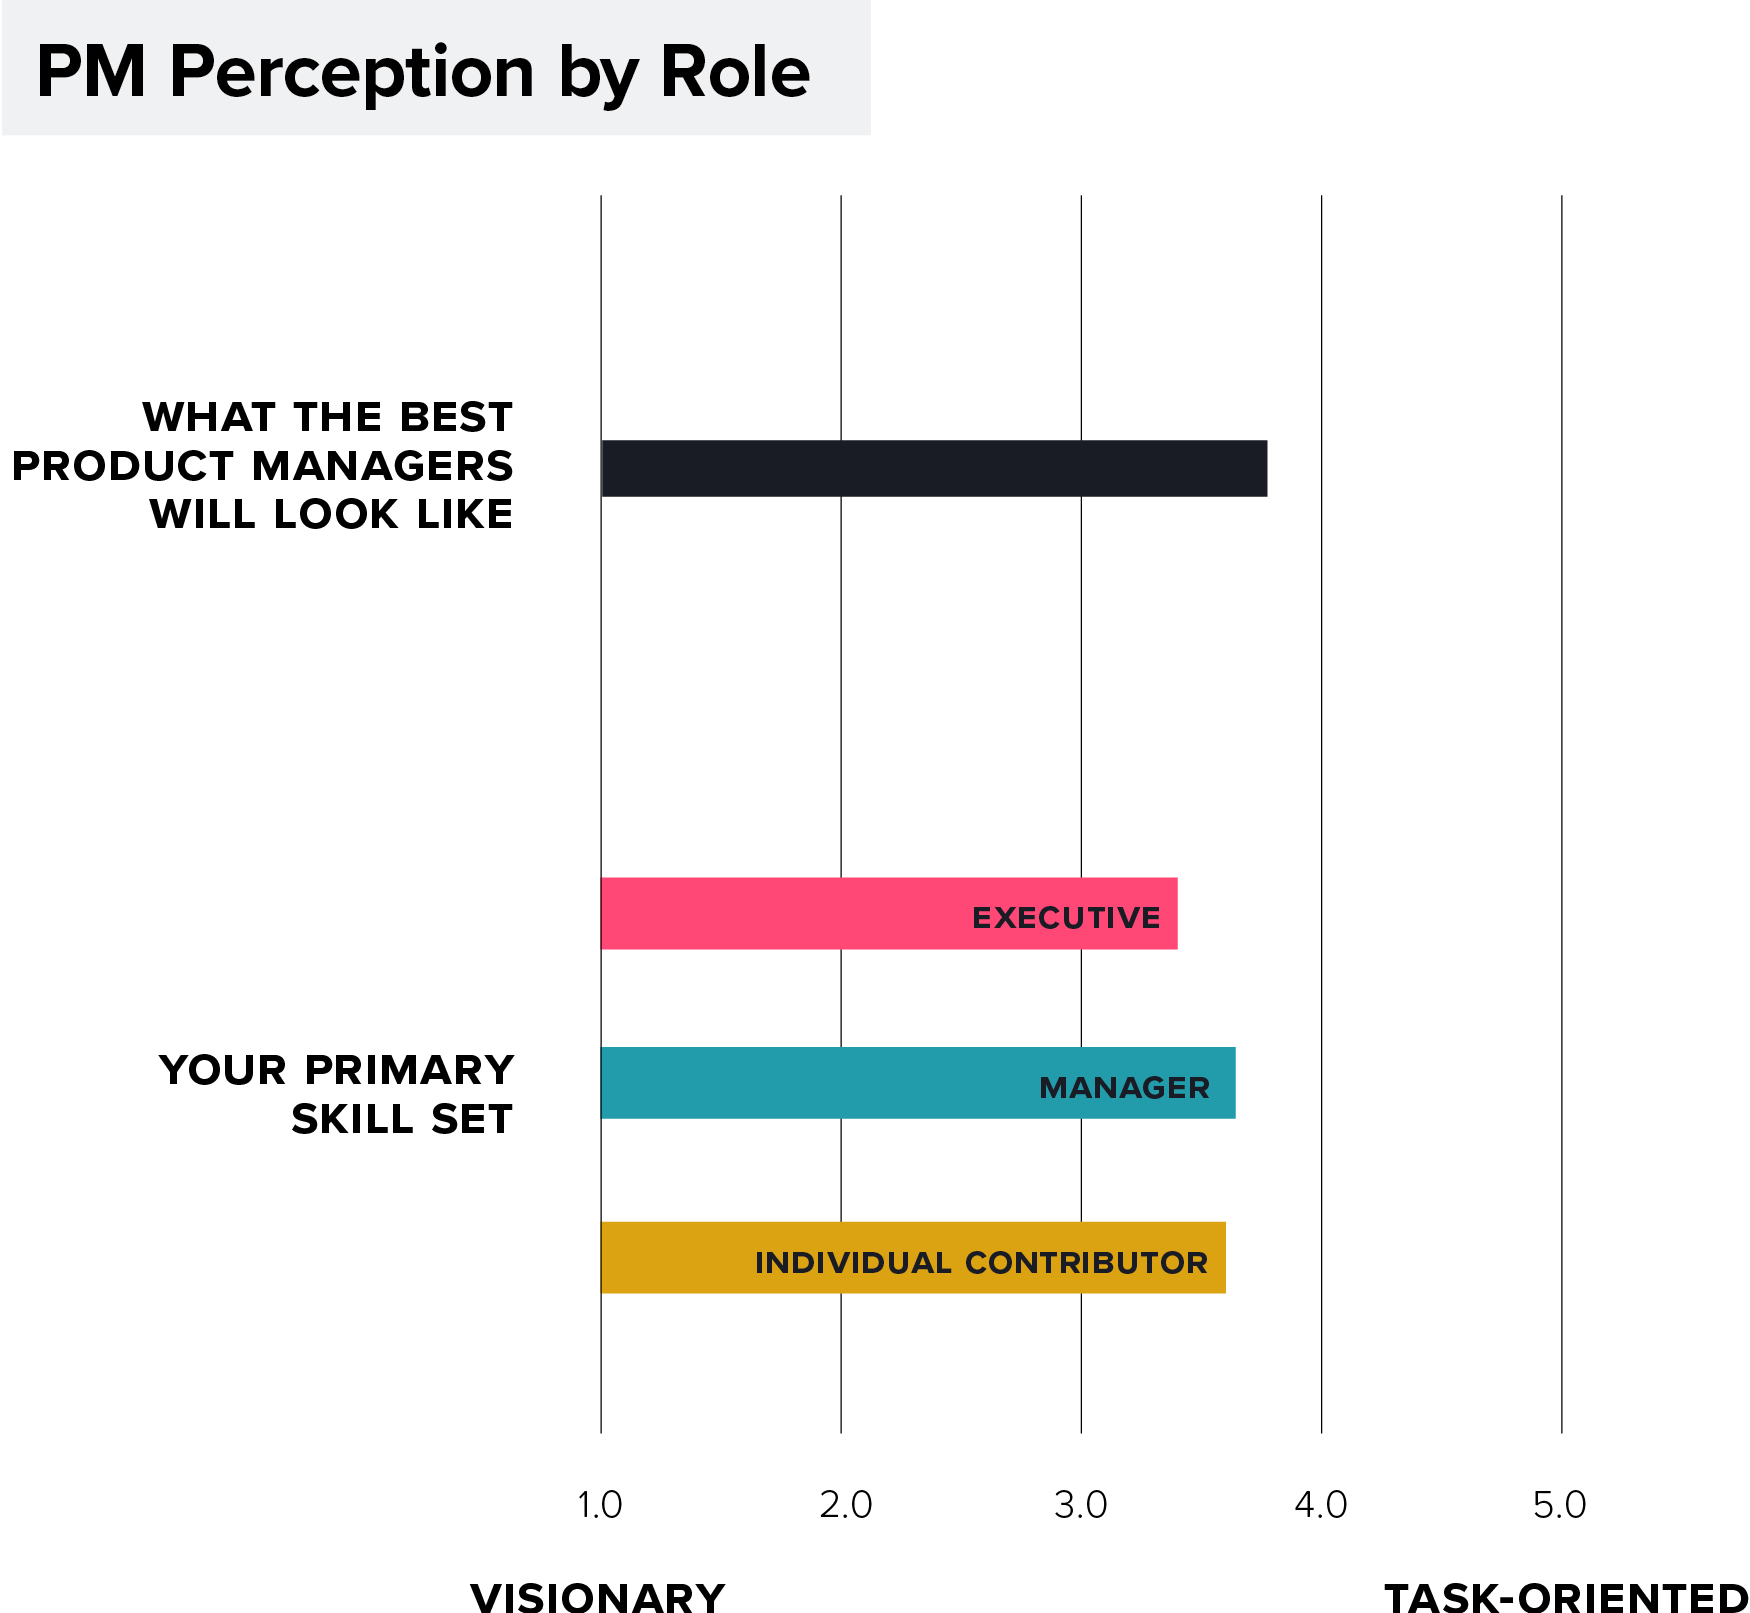 Survey Results Chart: Product Management Perception by Role